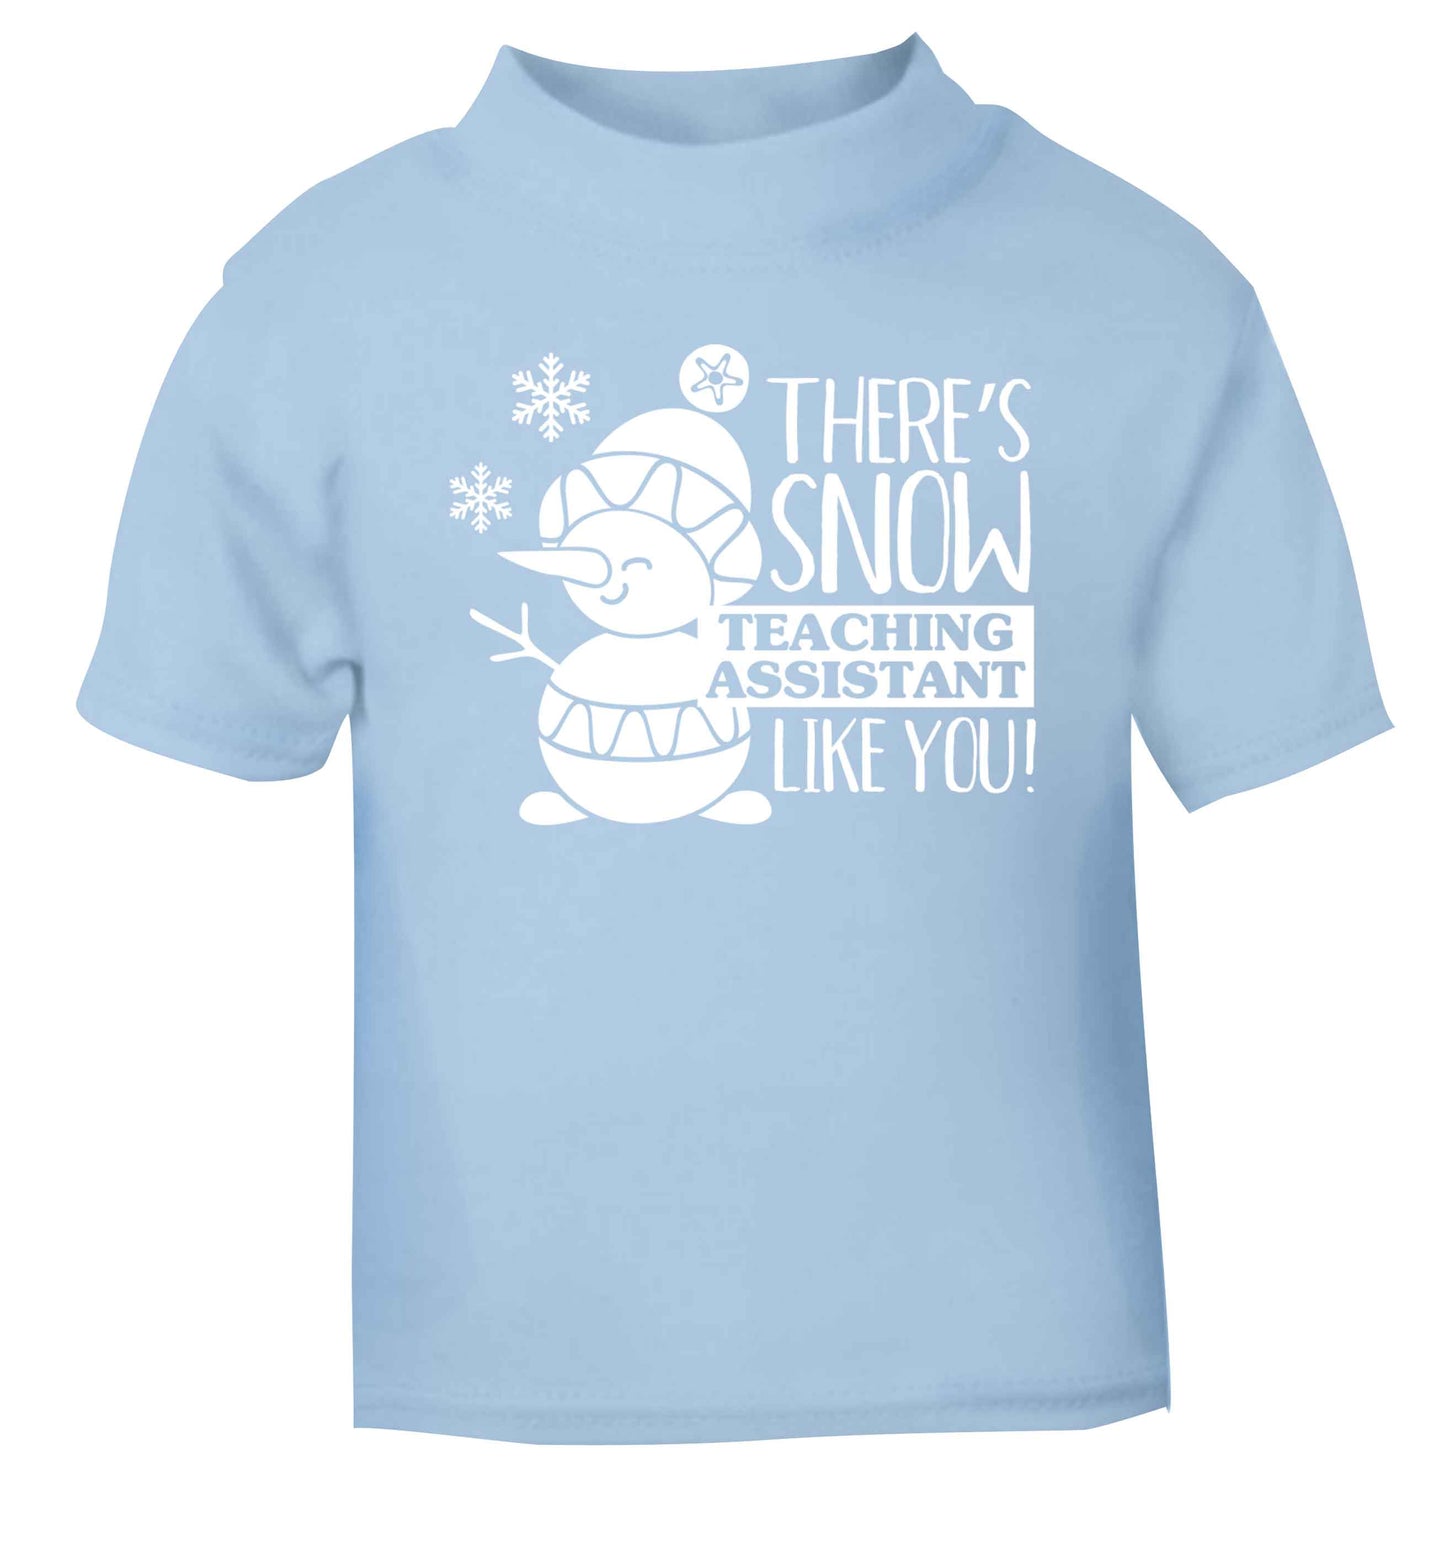 There's snow teaching assistant like you light blue baby toddler Tshirt 2 Years